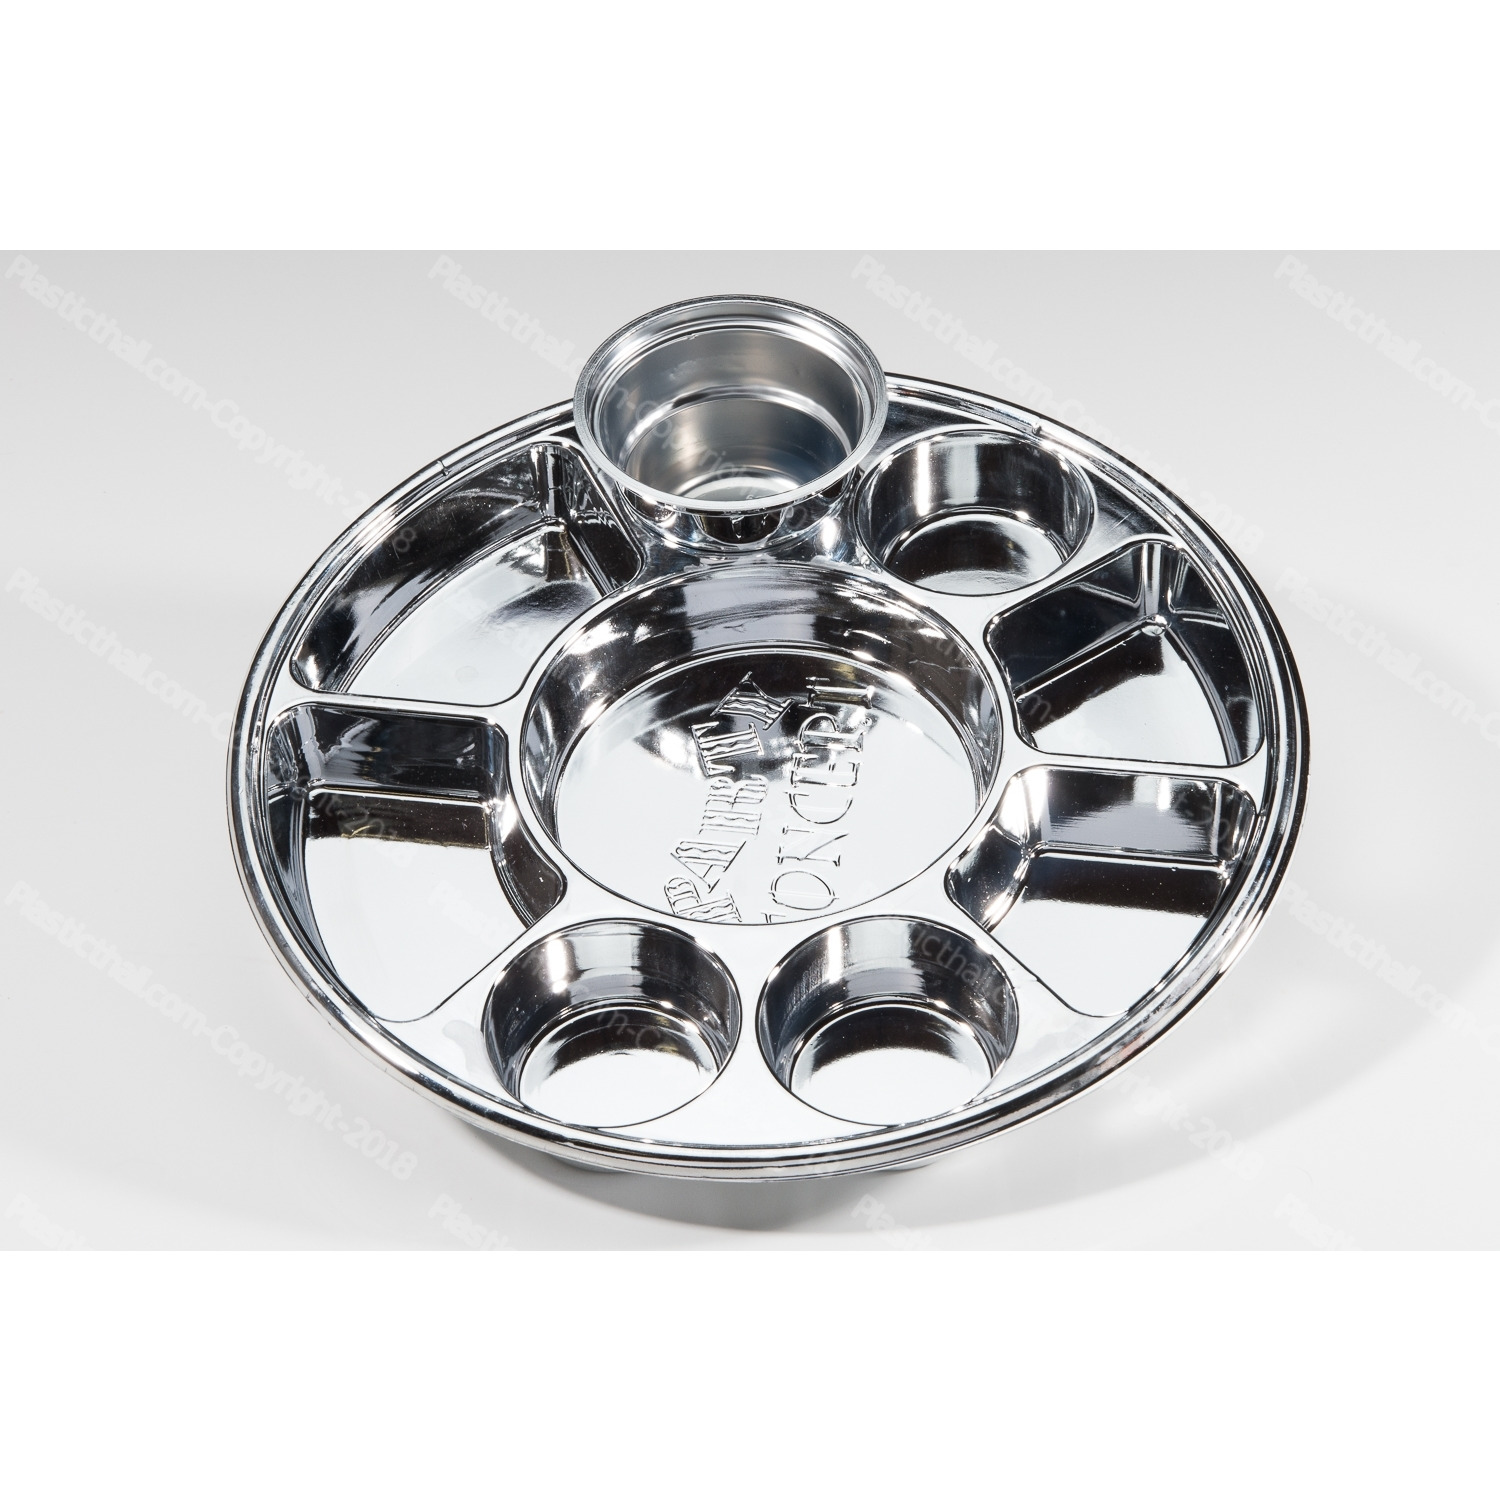 Metallic Silver 9 Compartment Plate-50 plates per pack